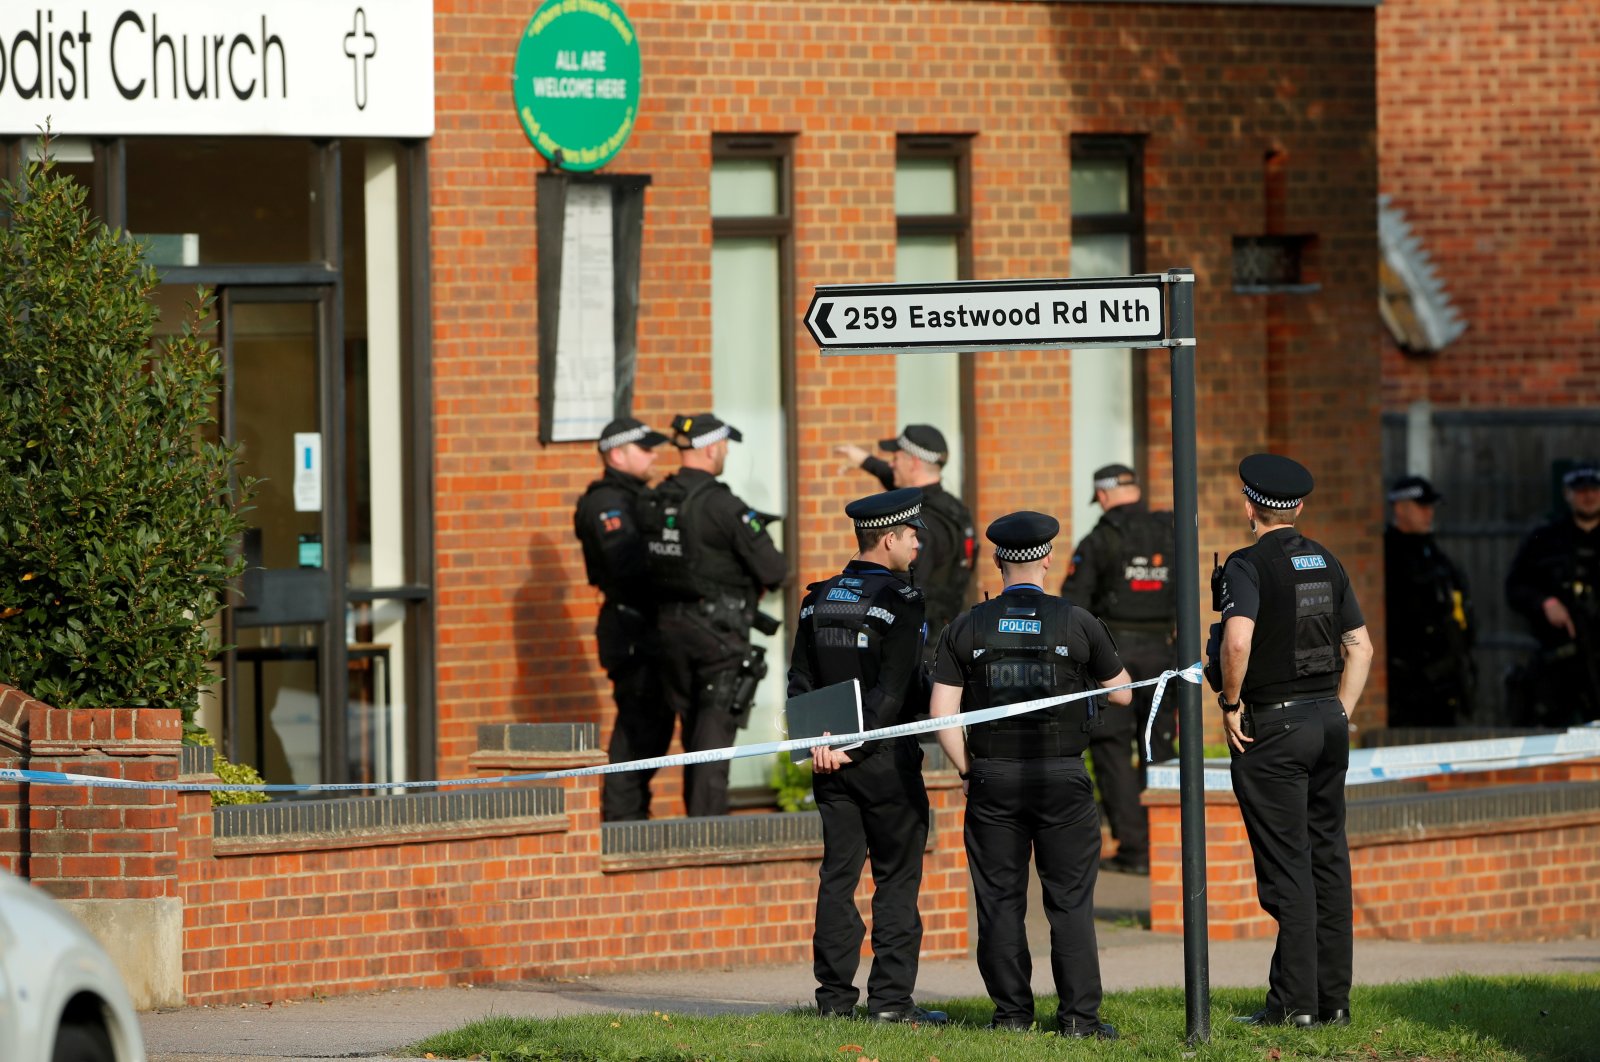 Police officers are seen at the scene where British lawmaker David Amess was murdered during a visit with constituents in Leigh-on-Sea, Britain, Oct. 15, 2021. (Reuters Photo)